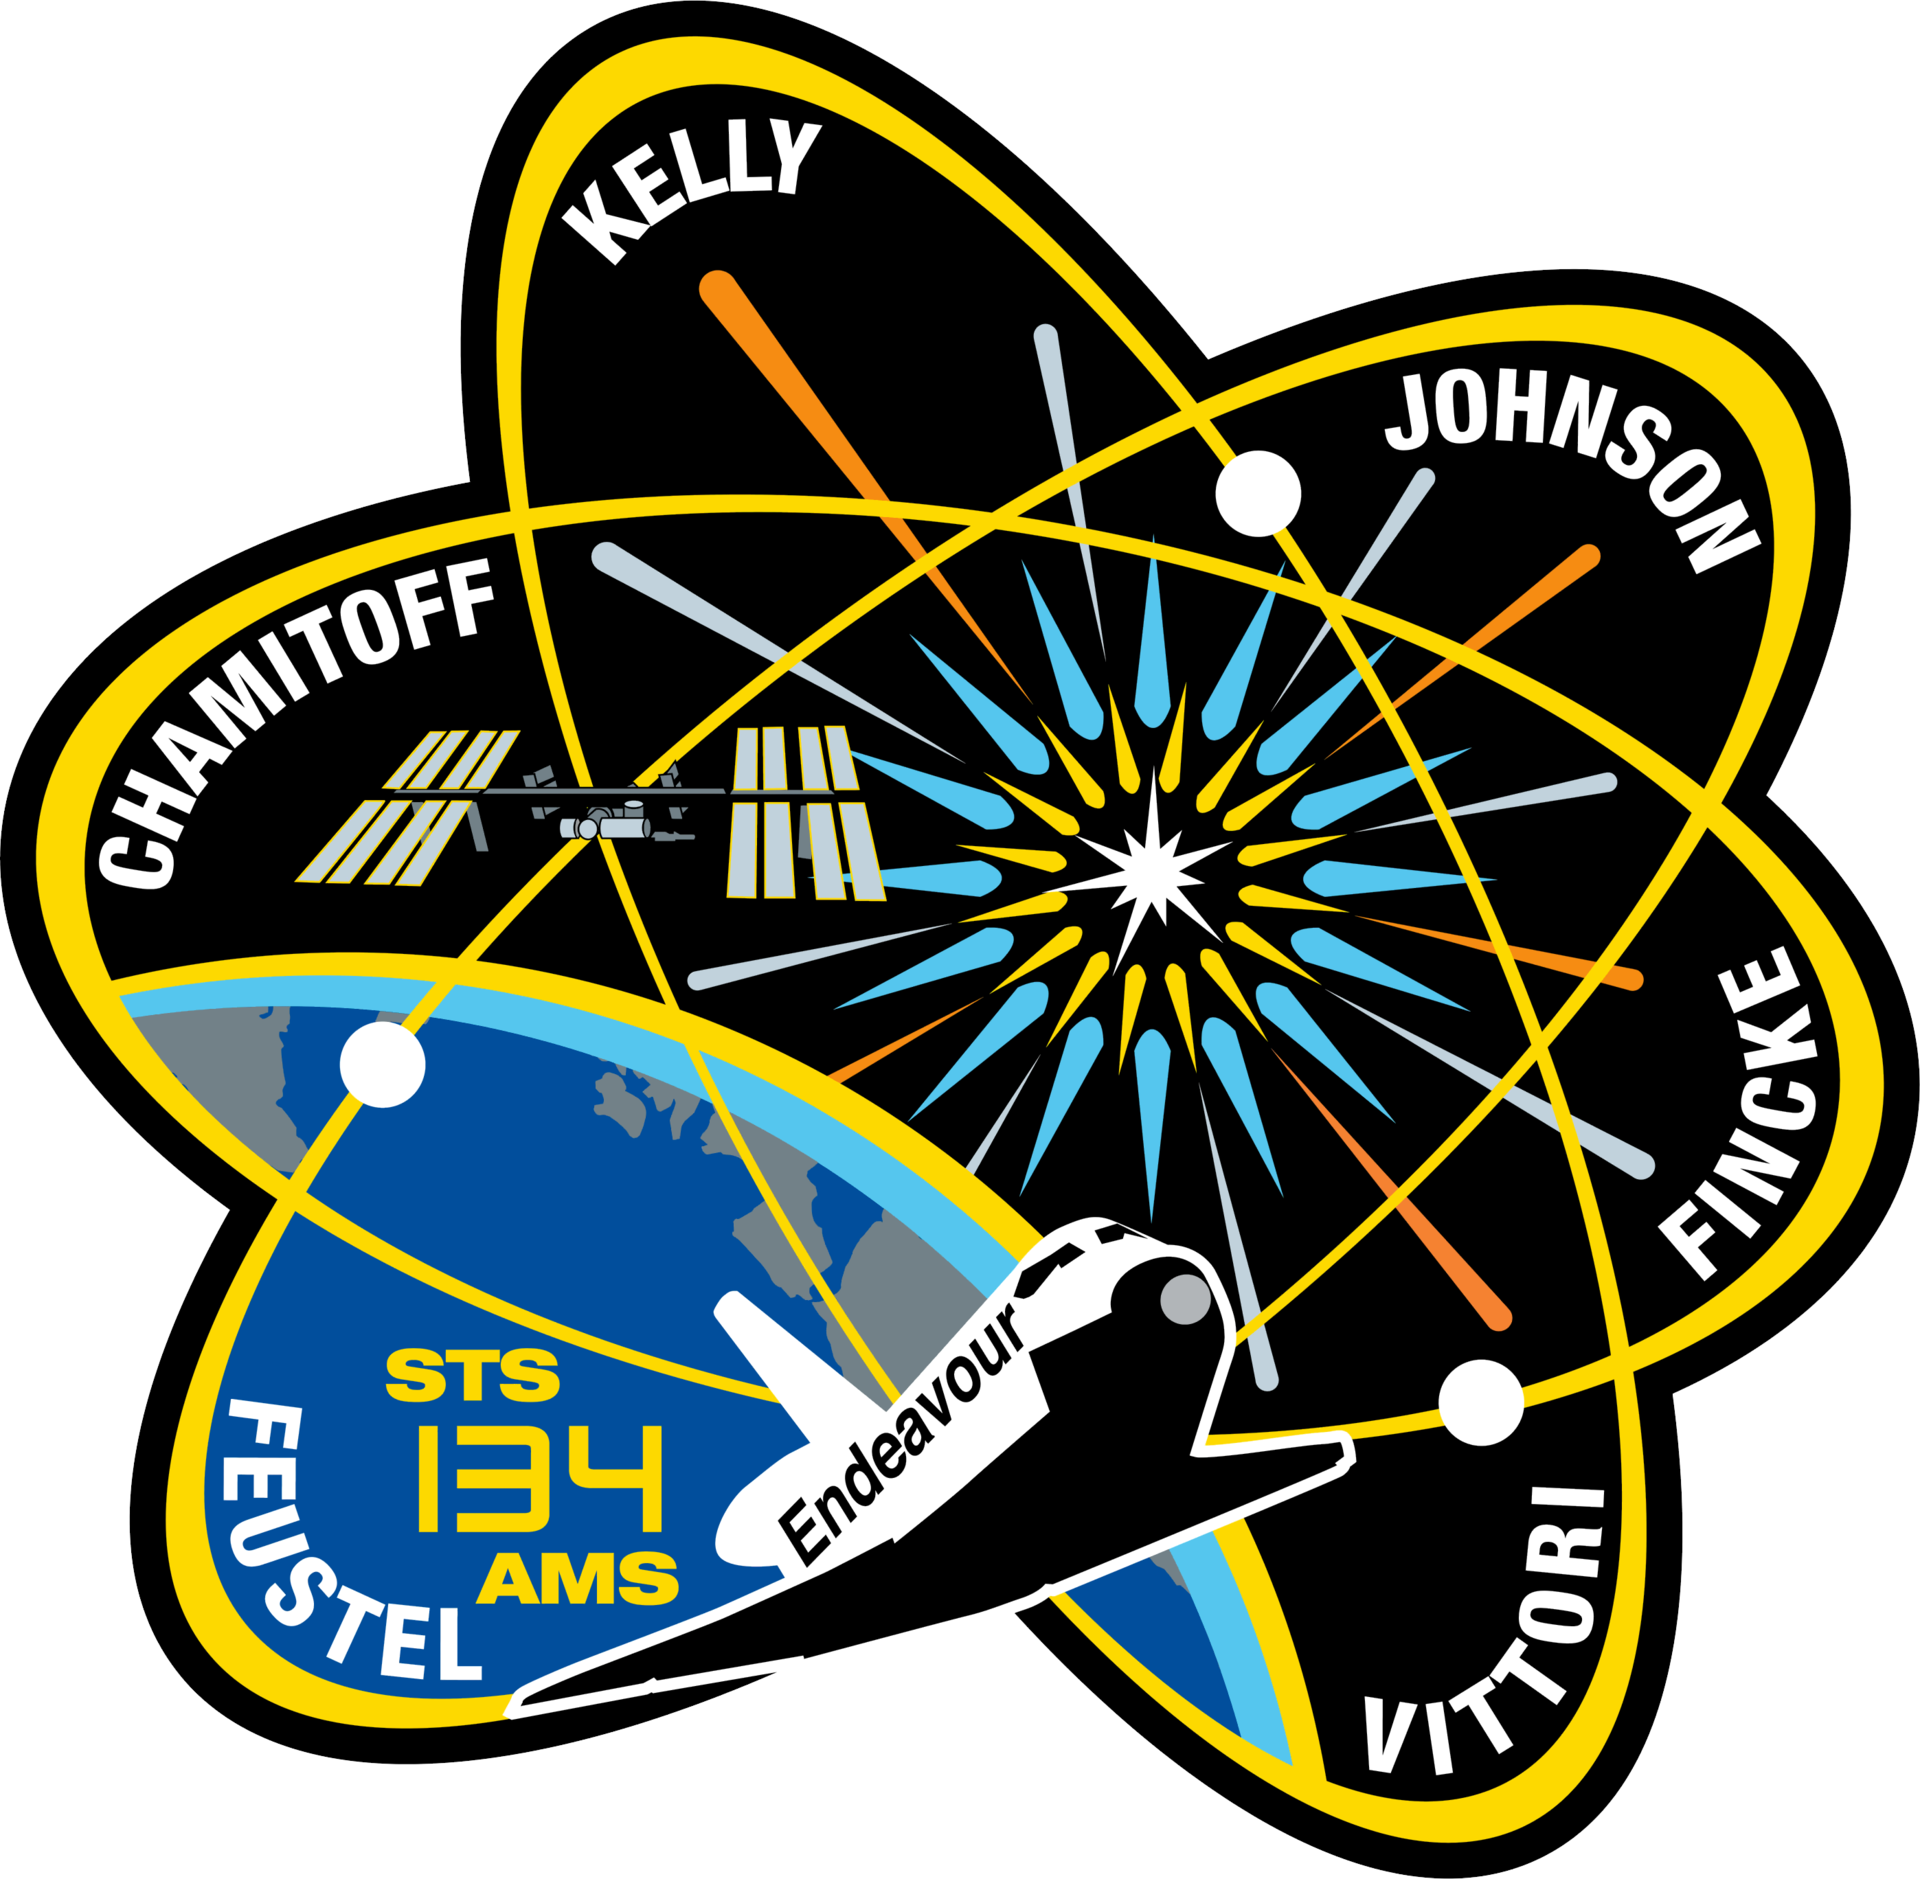 Mission patch for STS-134